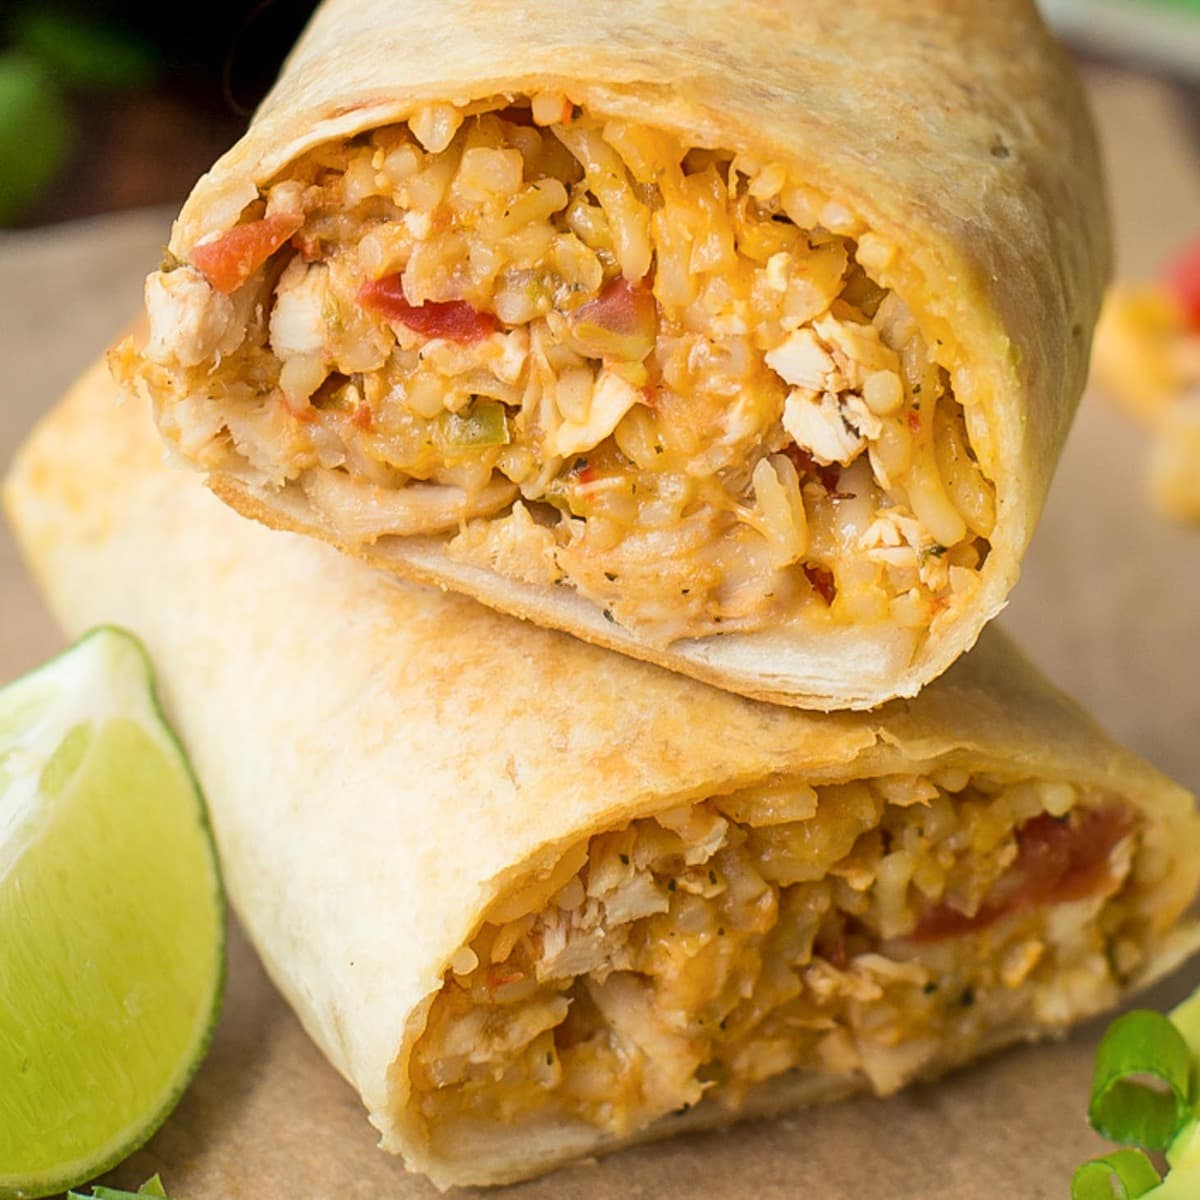 Rice and Chicken Chimichanga cut in half